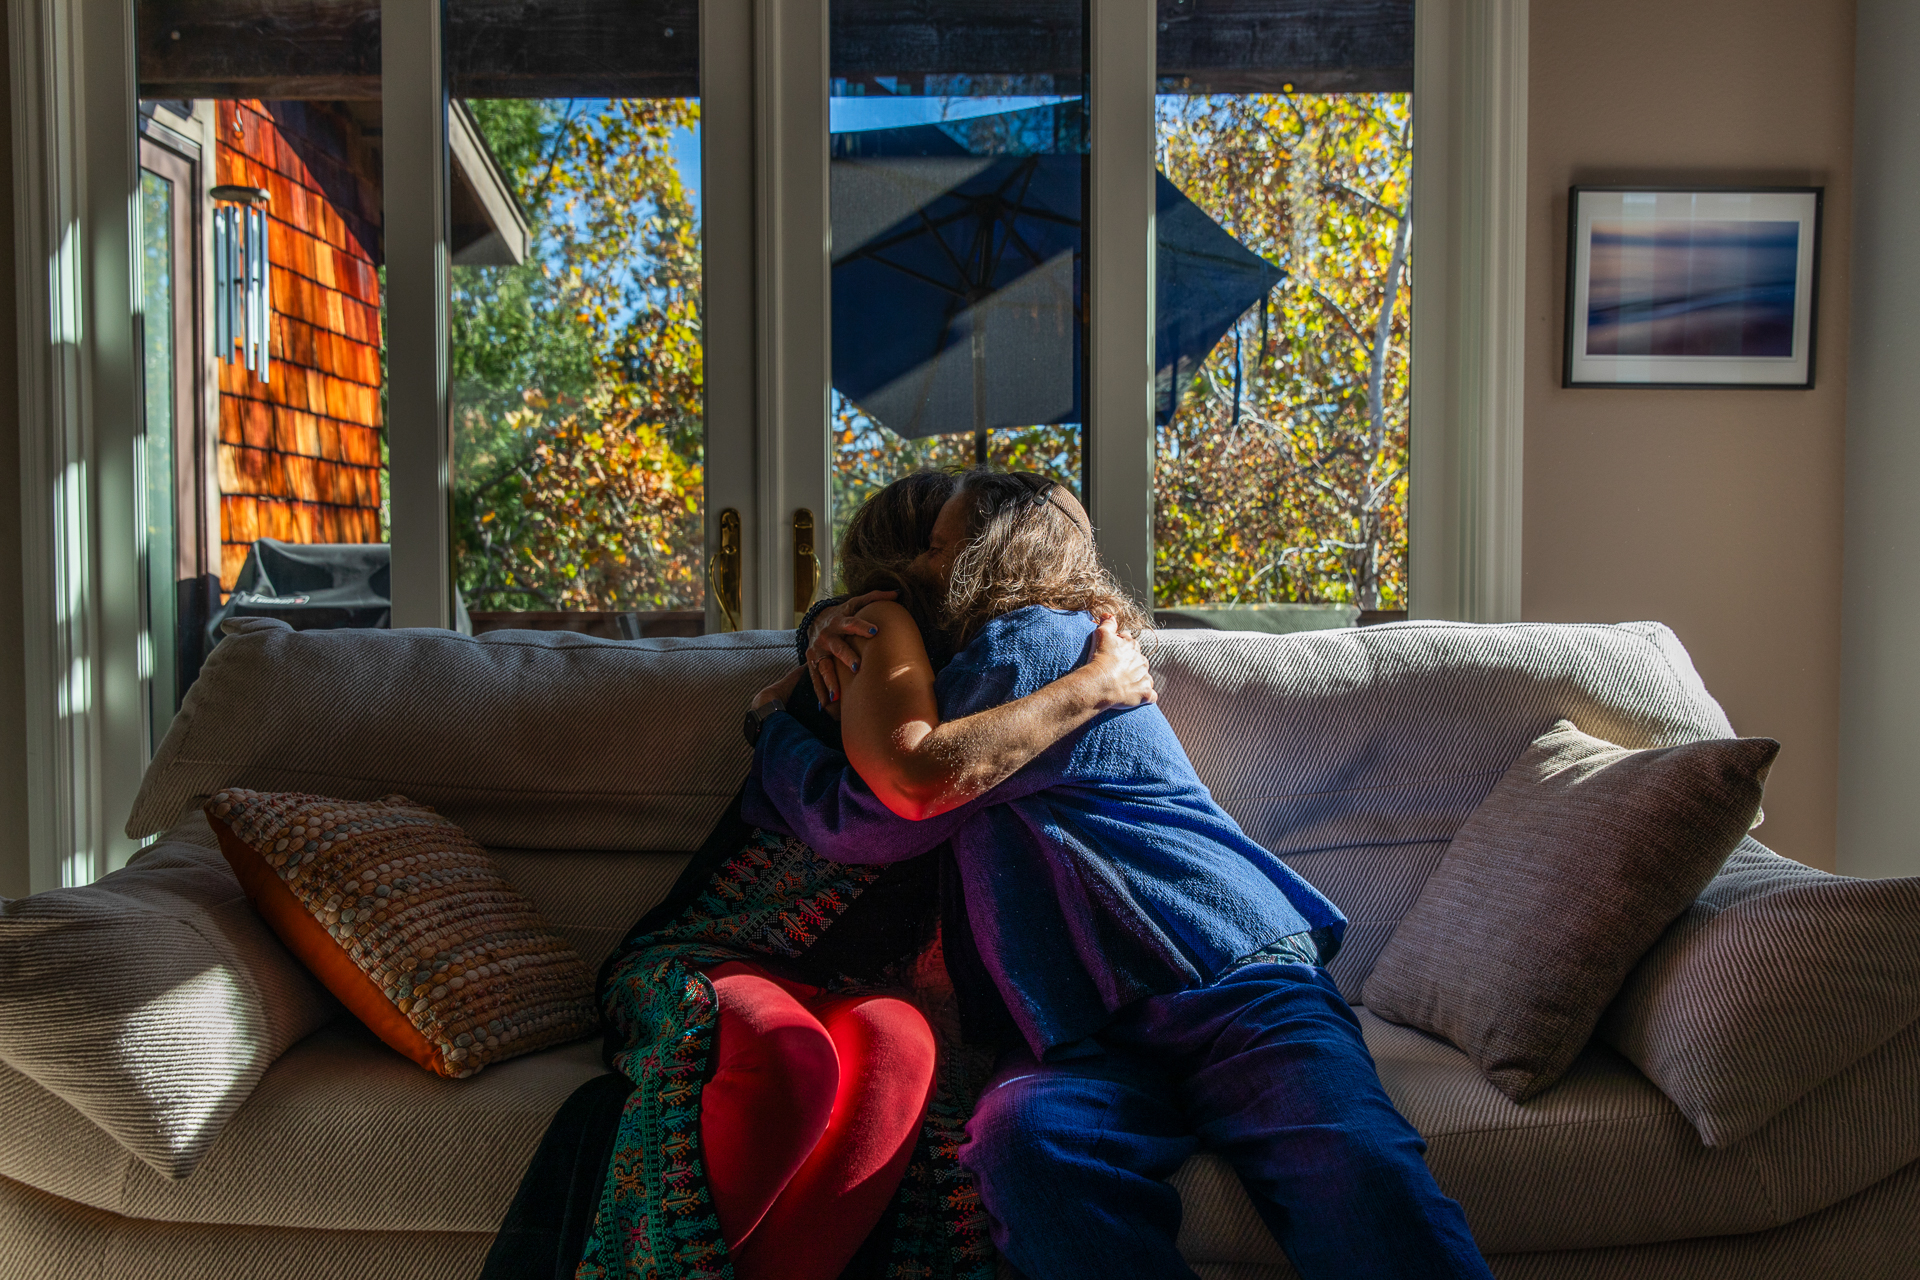 Two women hug each other while sitting on a couch in a home.